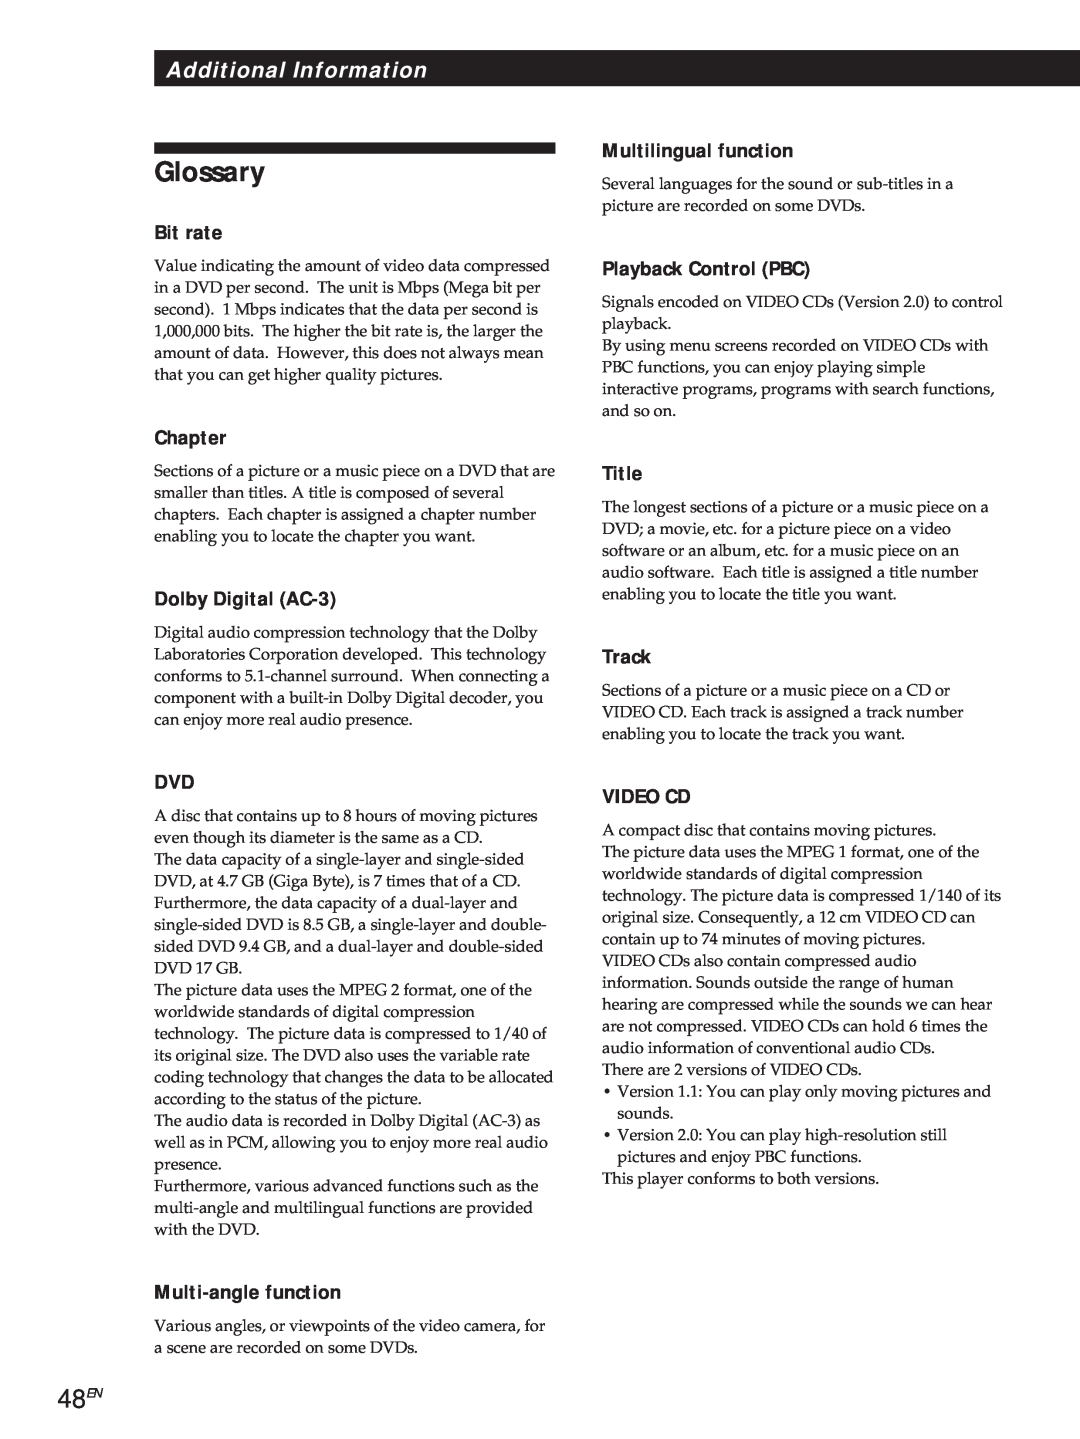 Sony DVP3980 manual Glossary, 48EN, Additional Information 